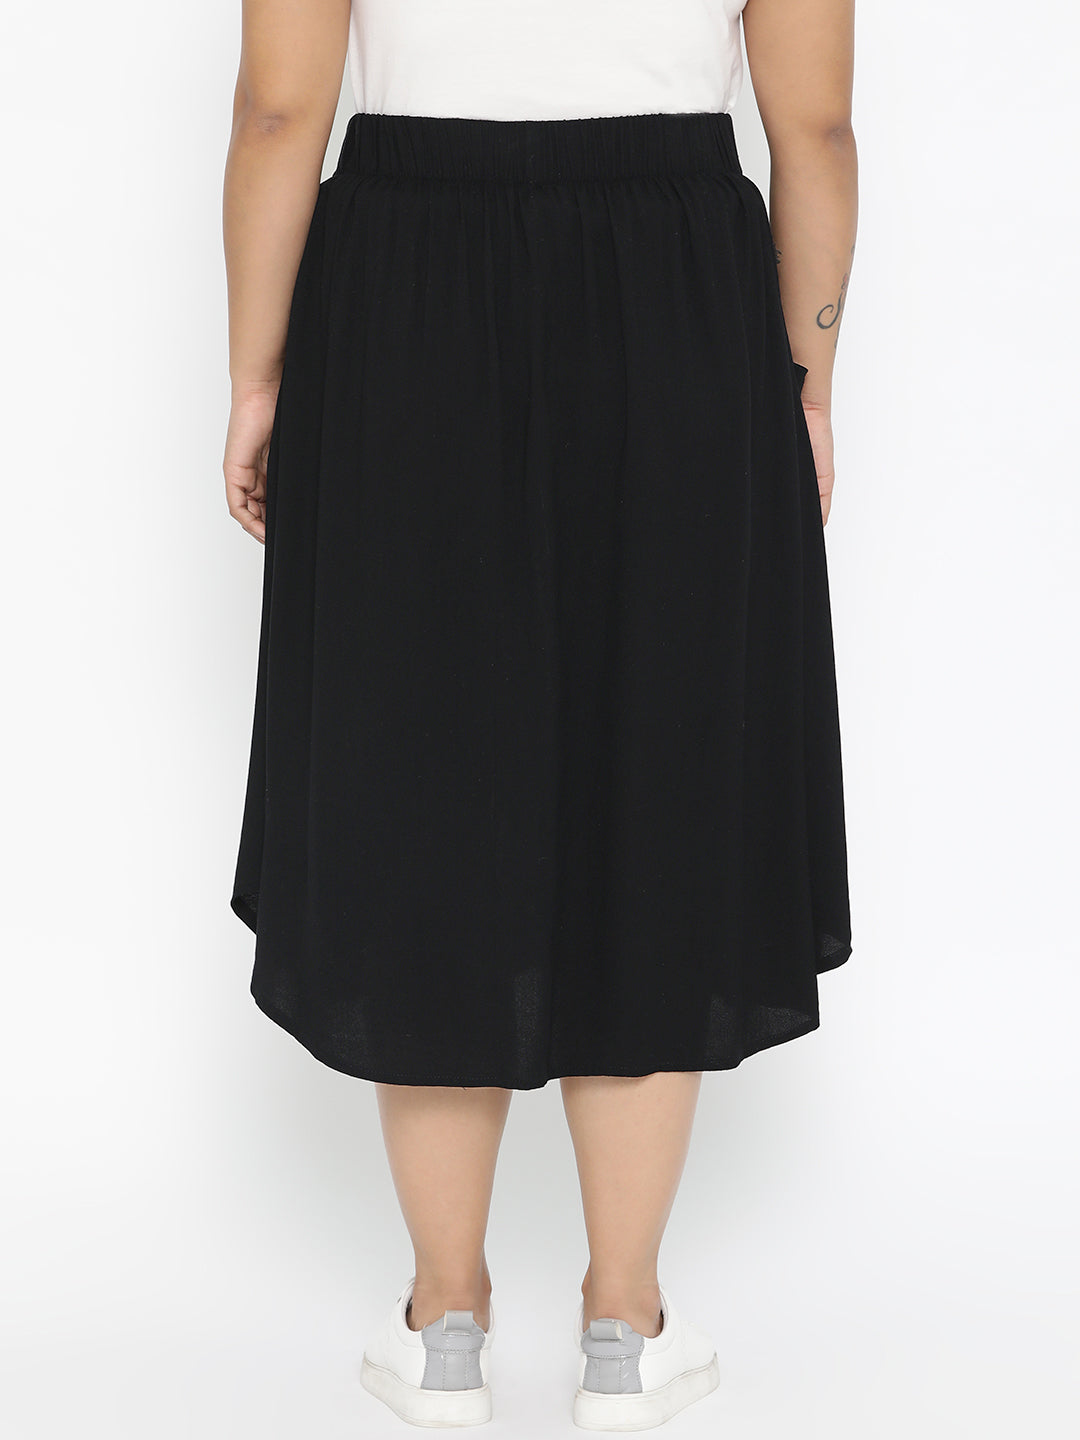 BLACK A LINE SKIRT WITH BUTTONS